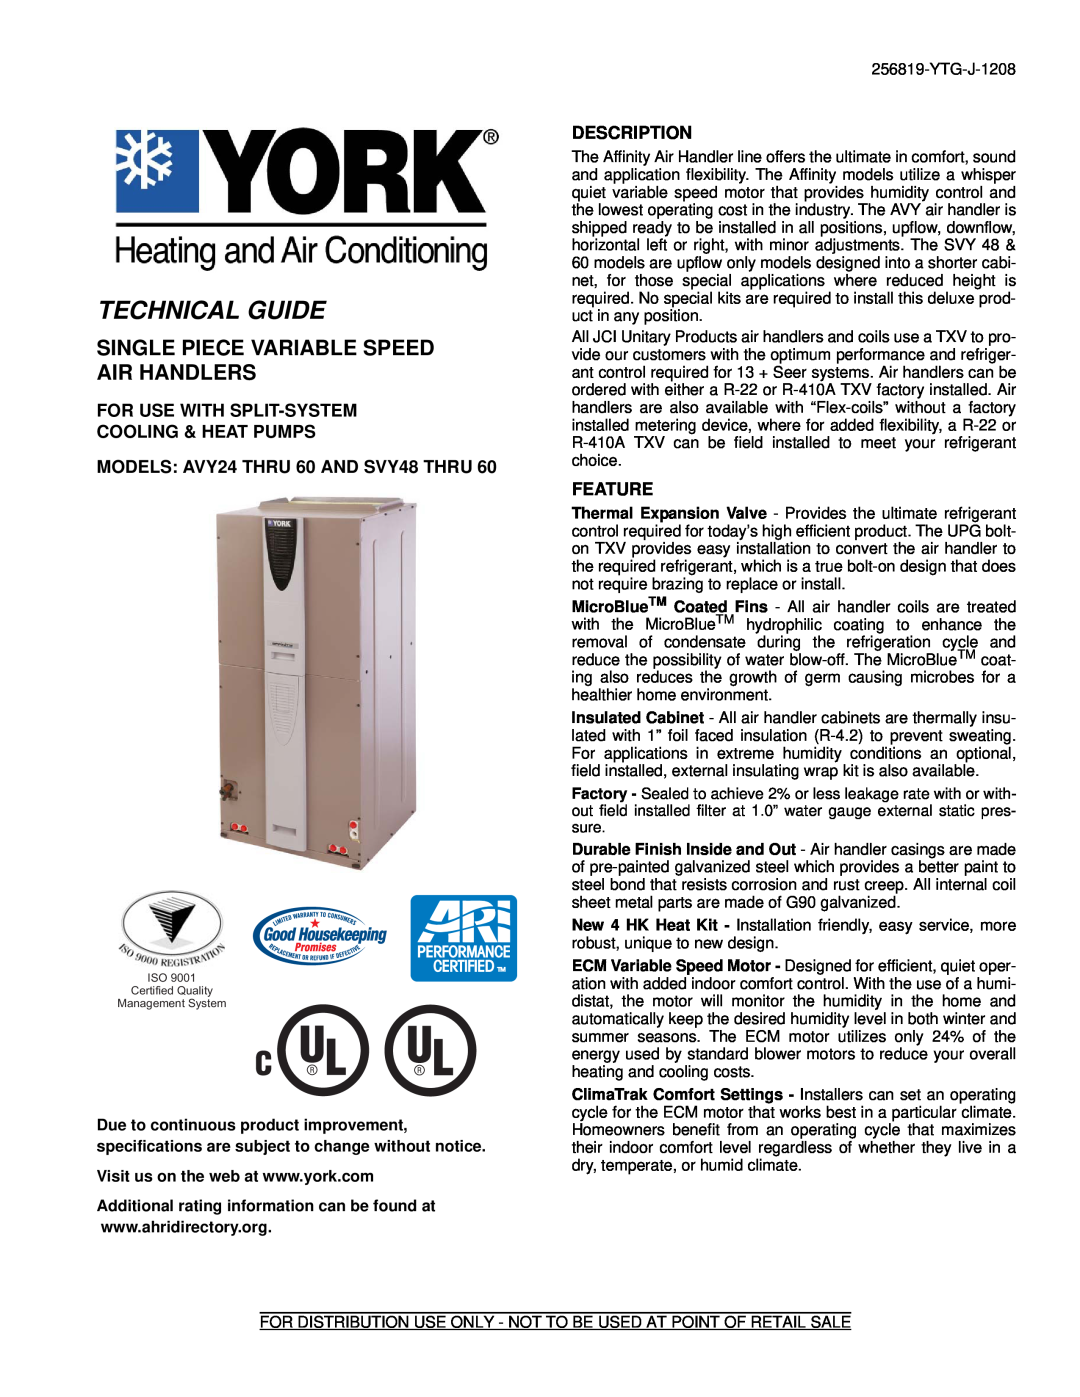 York specifications For Use With Split-System Cooling & Heat Pumps, MODELS AVY24 THRU 60 AND SVY48 THRU, Description 